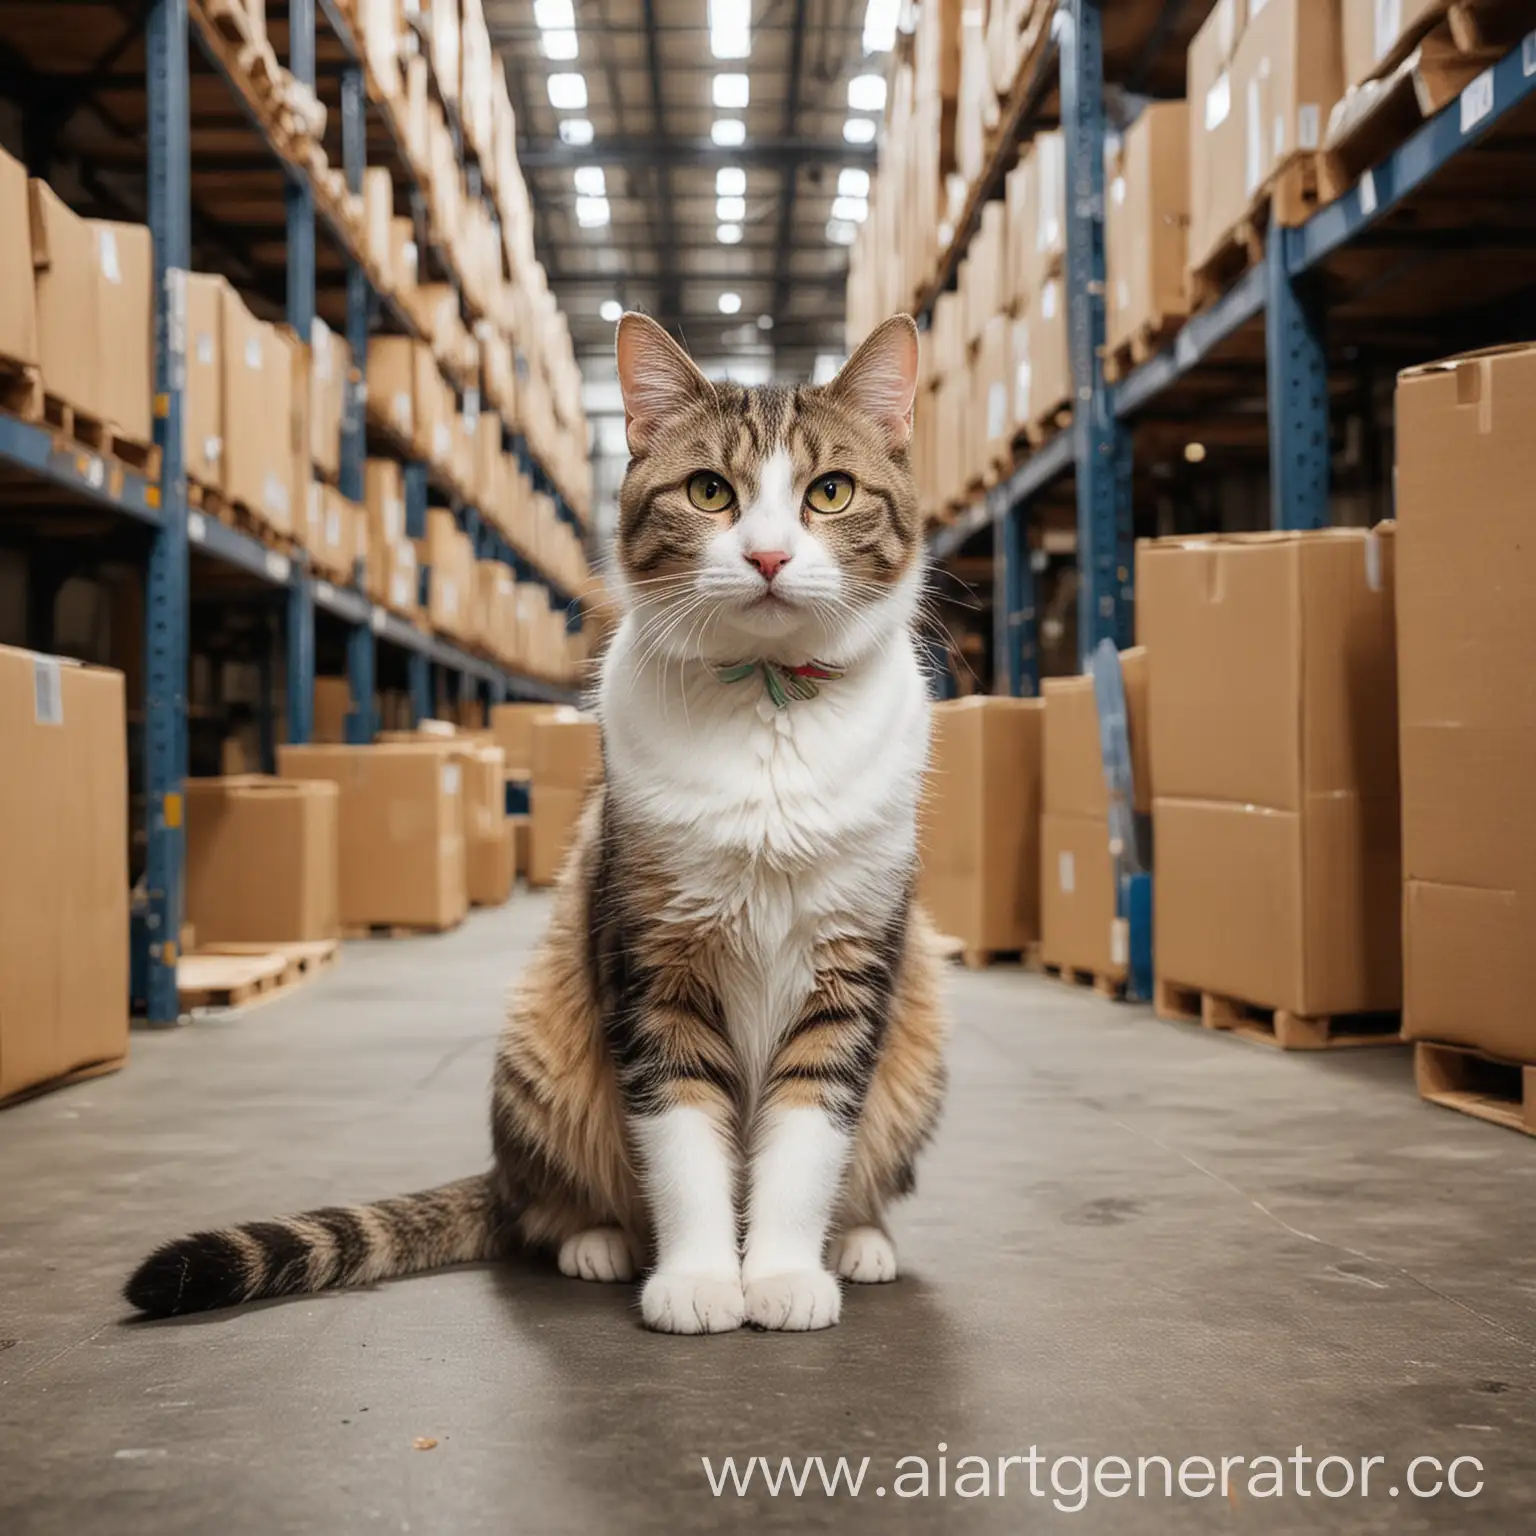 Cat-Working-in-Warehouse-with-Boxes